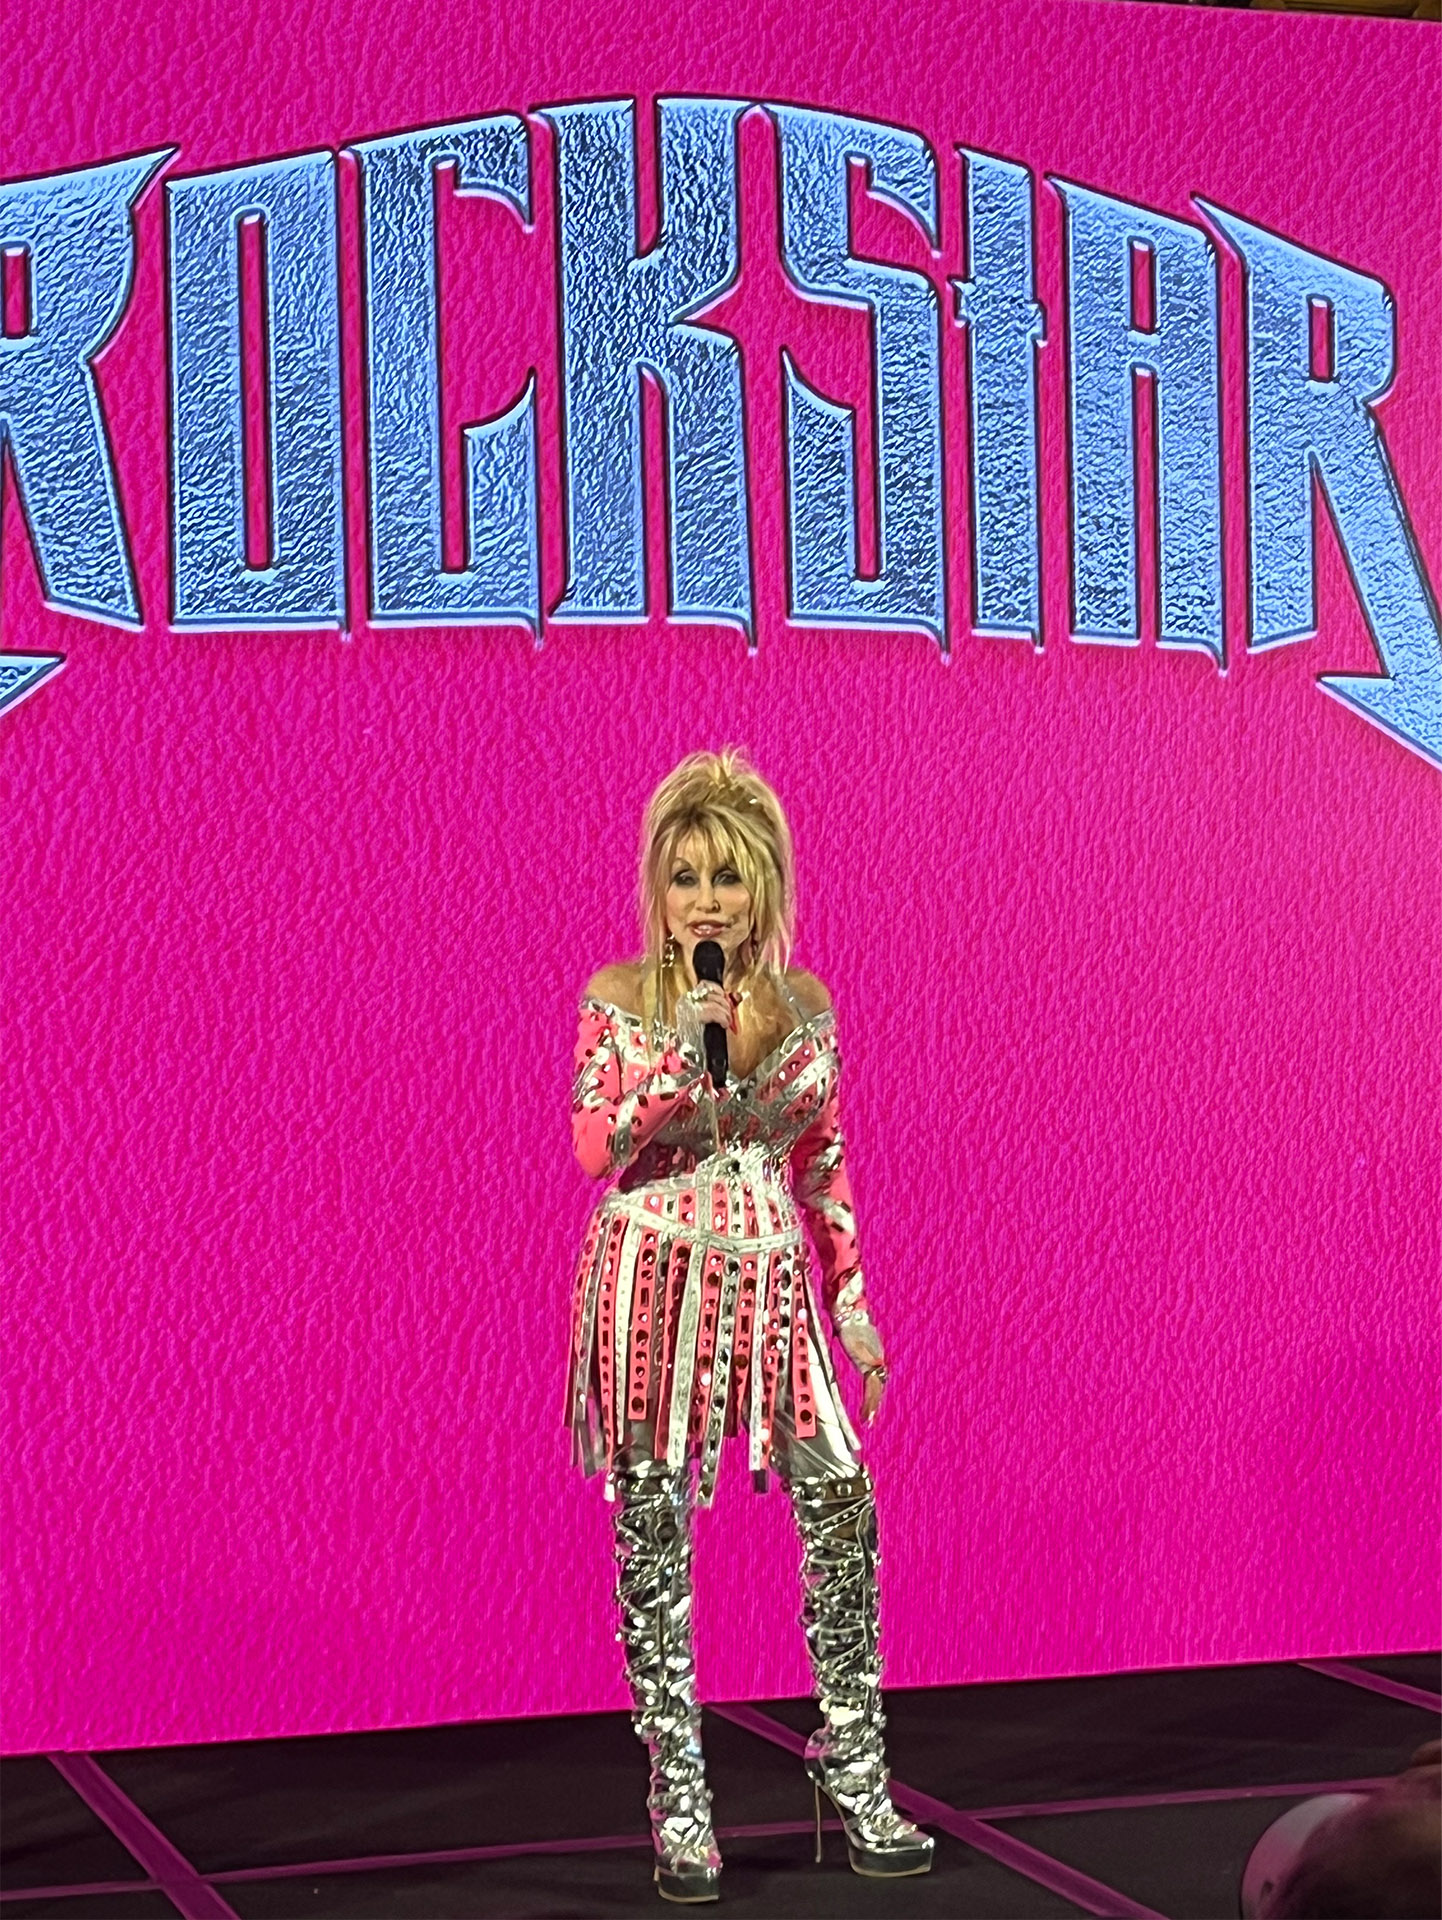 Dolly Parton at the launch of her album Rockstar